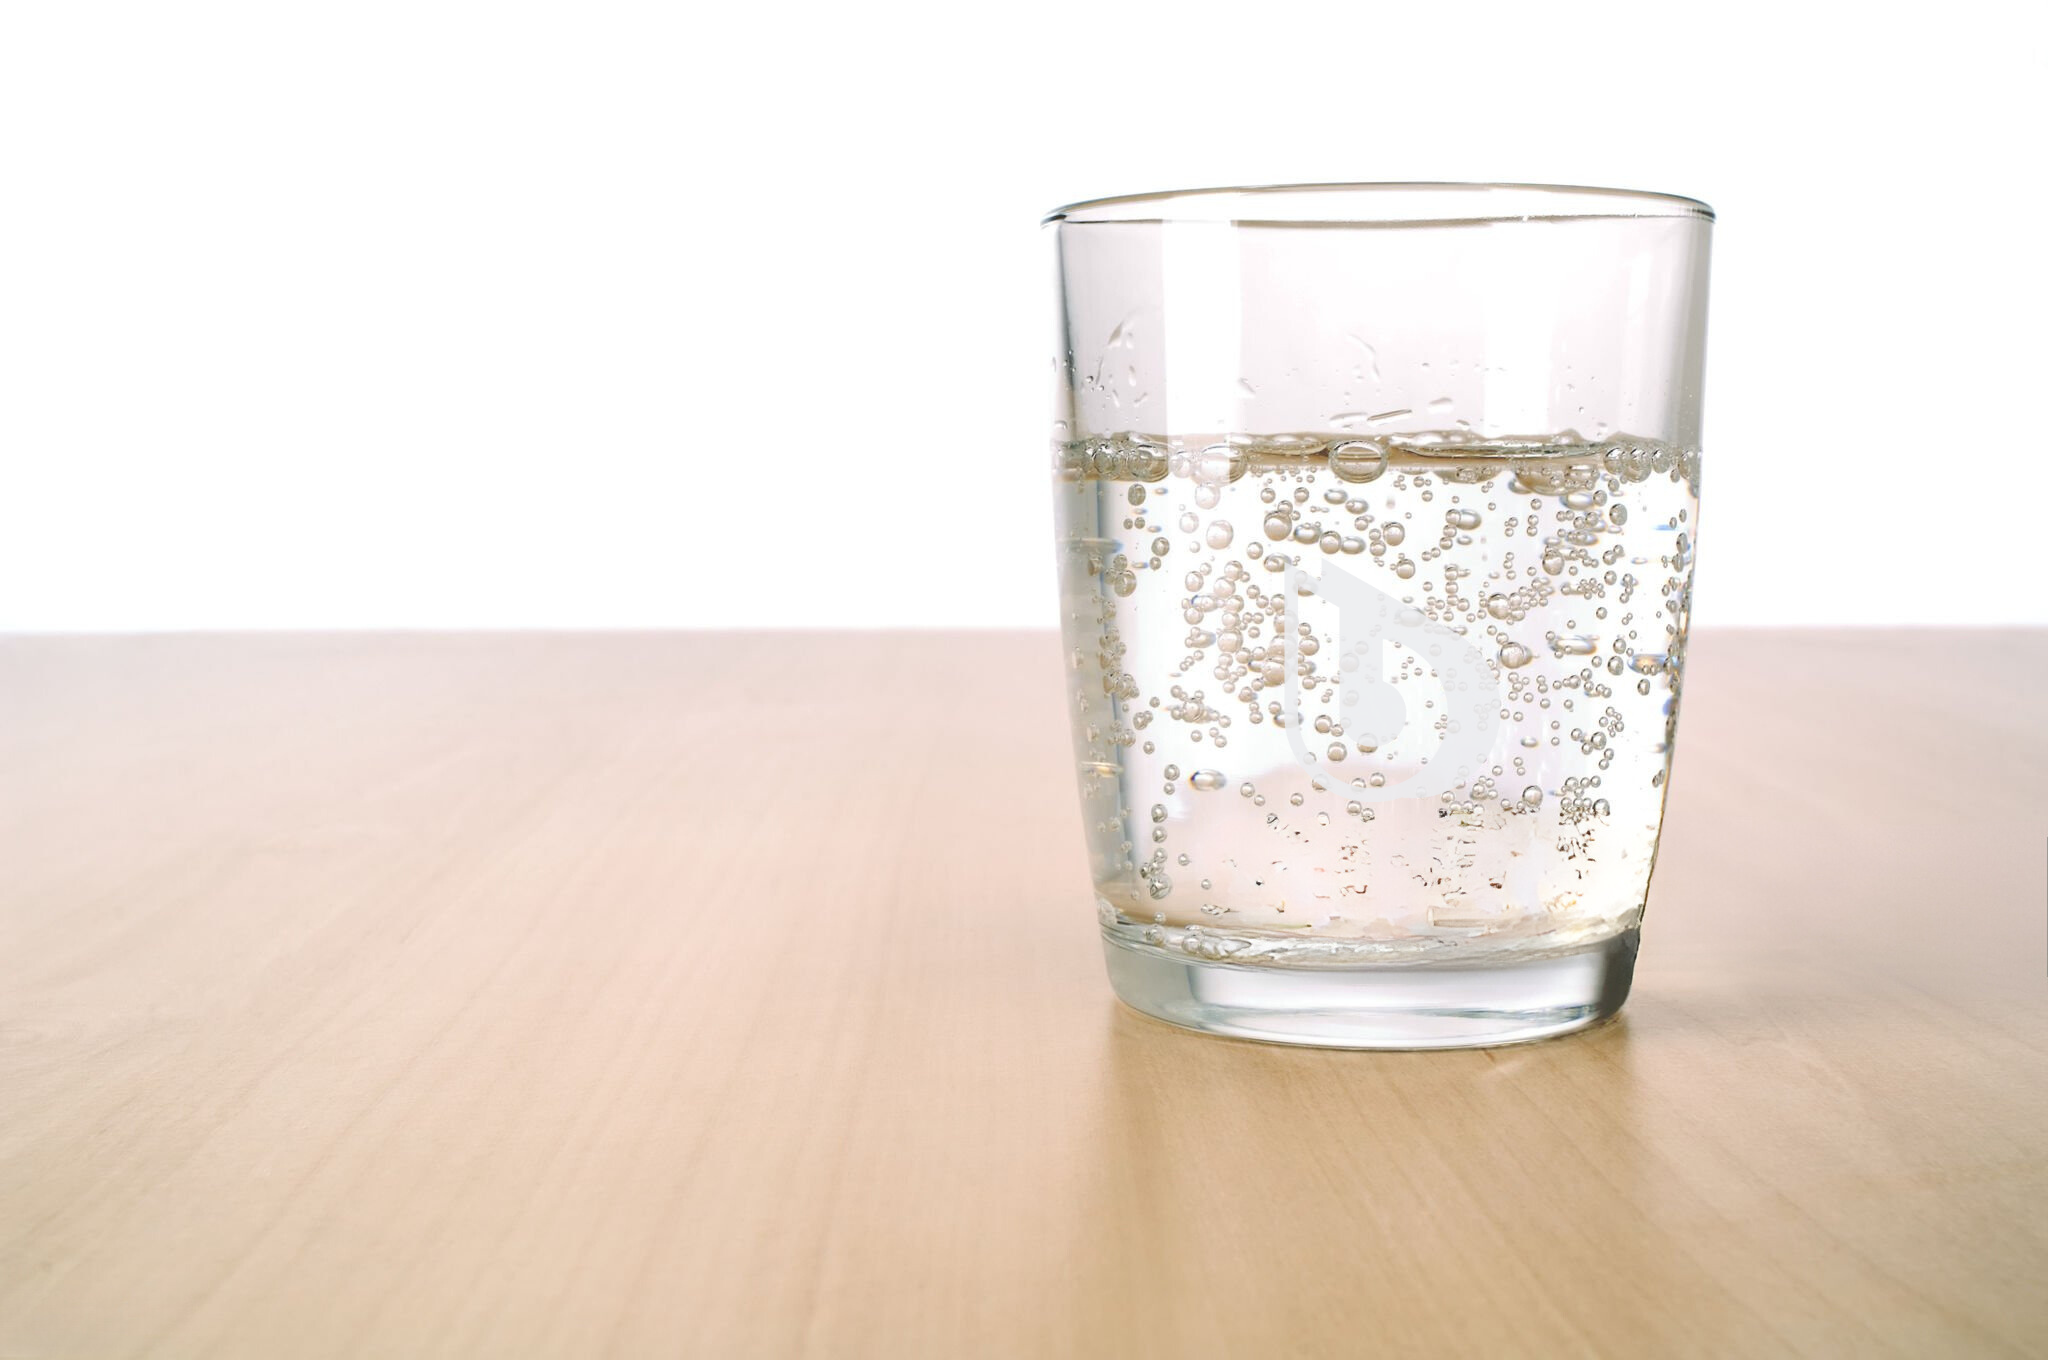 Soda Water: Is it safe to wash your face? 😲